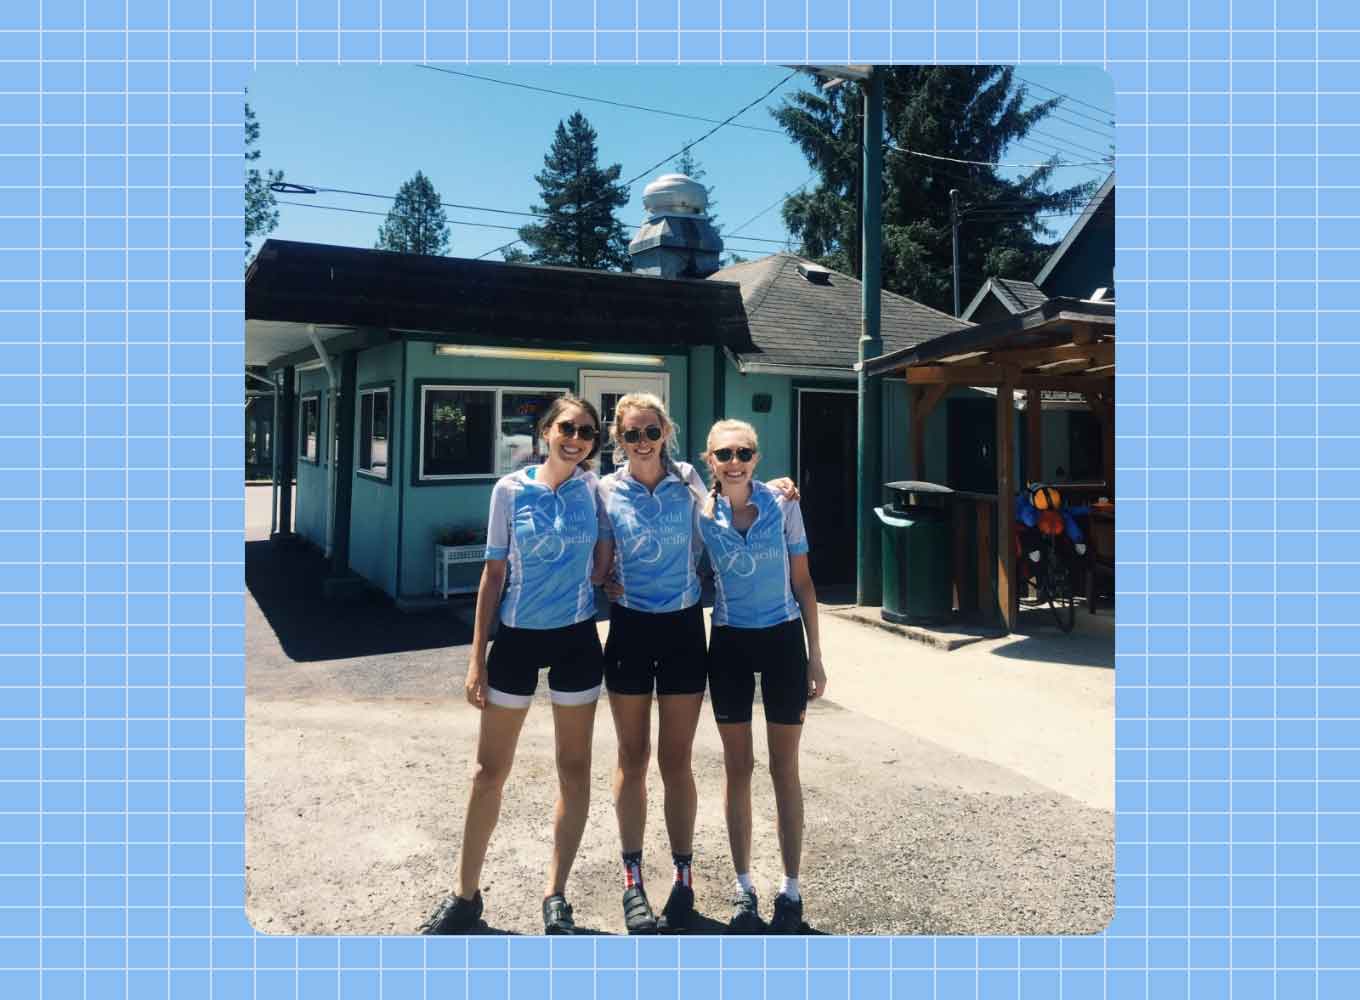 Three white women stand side-by-side in matching blue bike jerseys and black bike shorts, smiling.